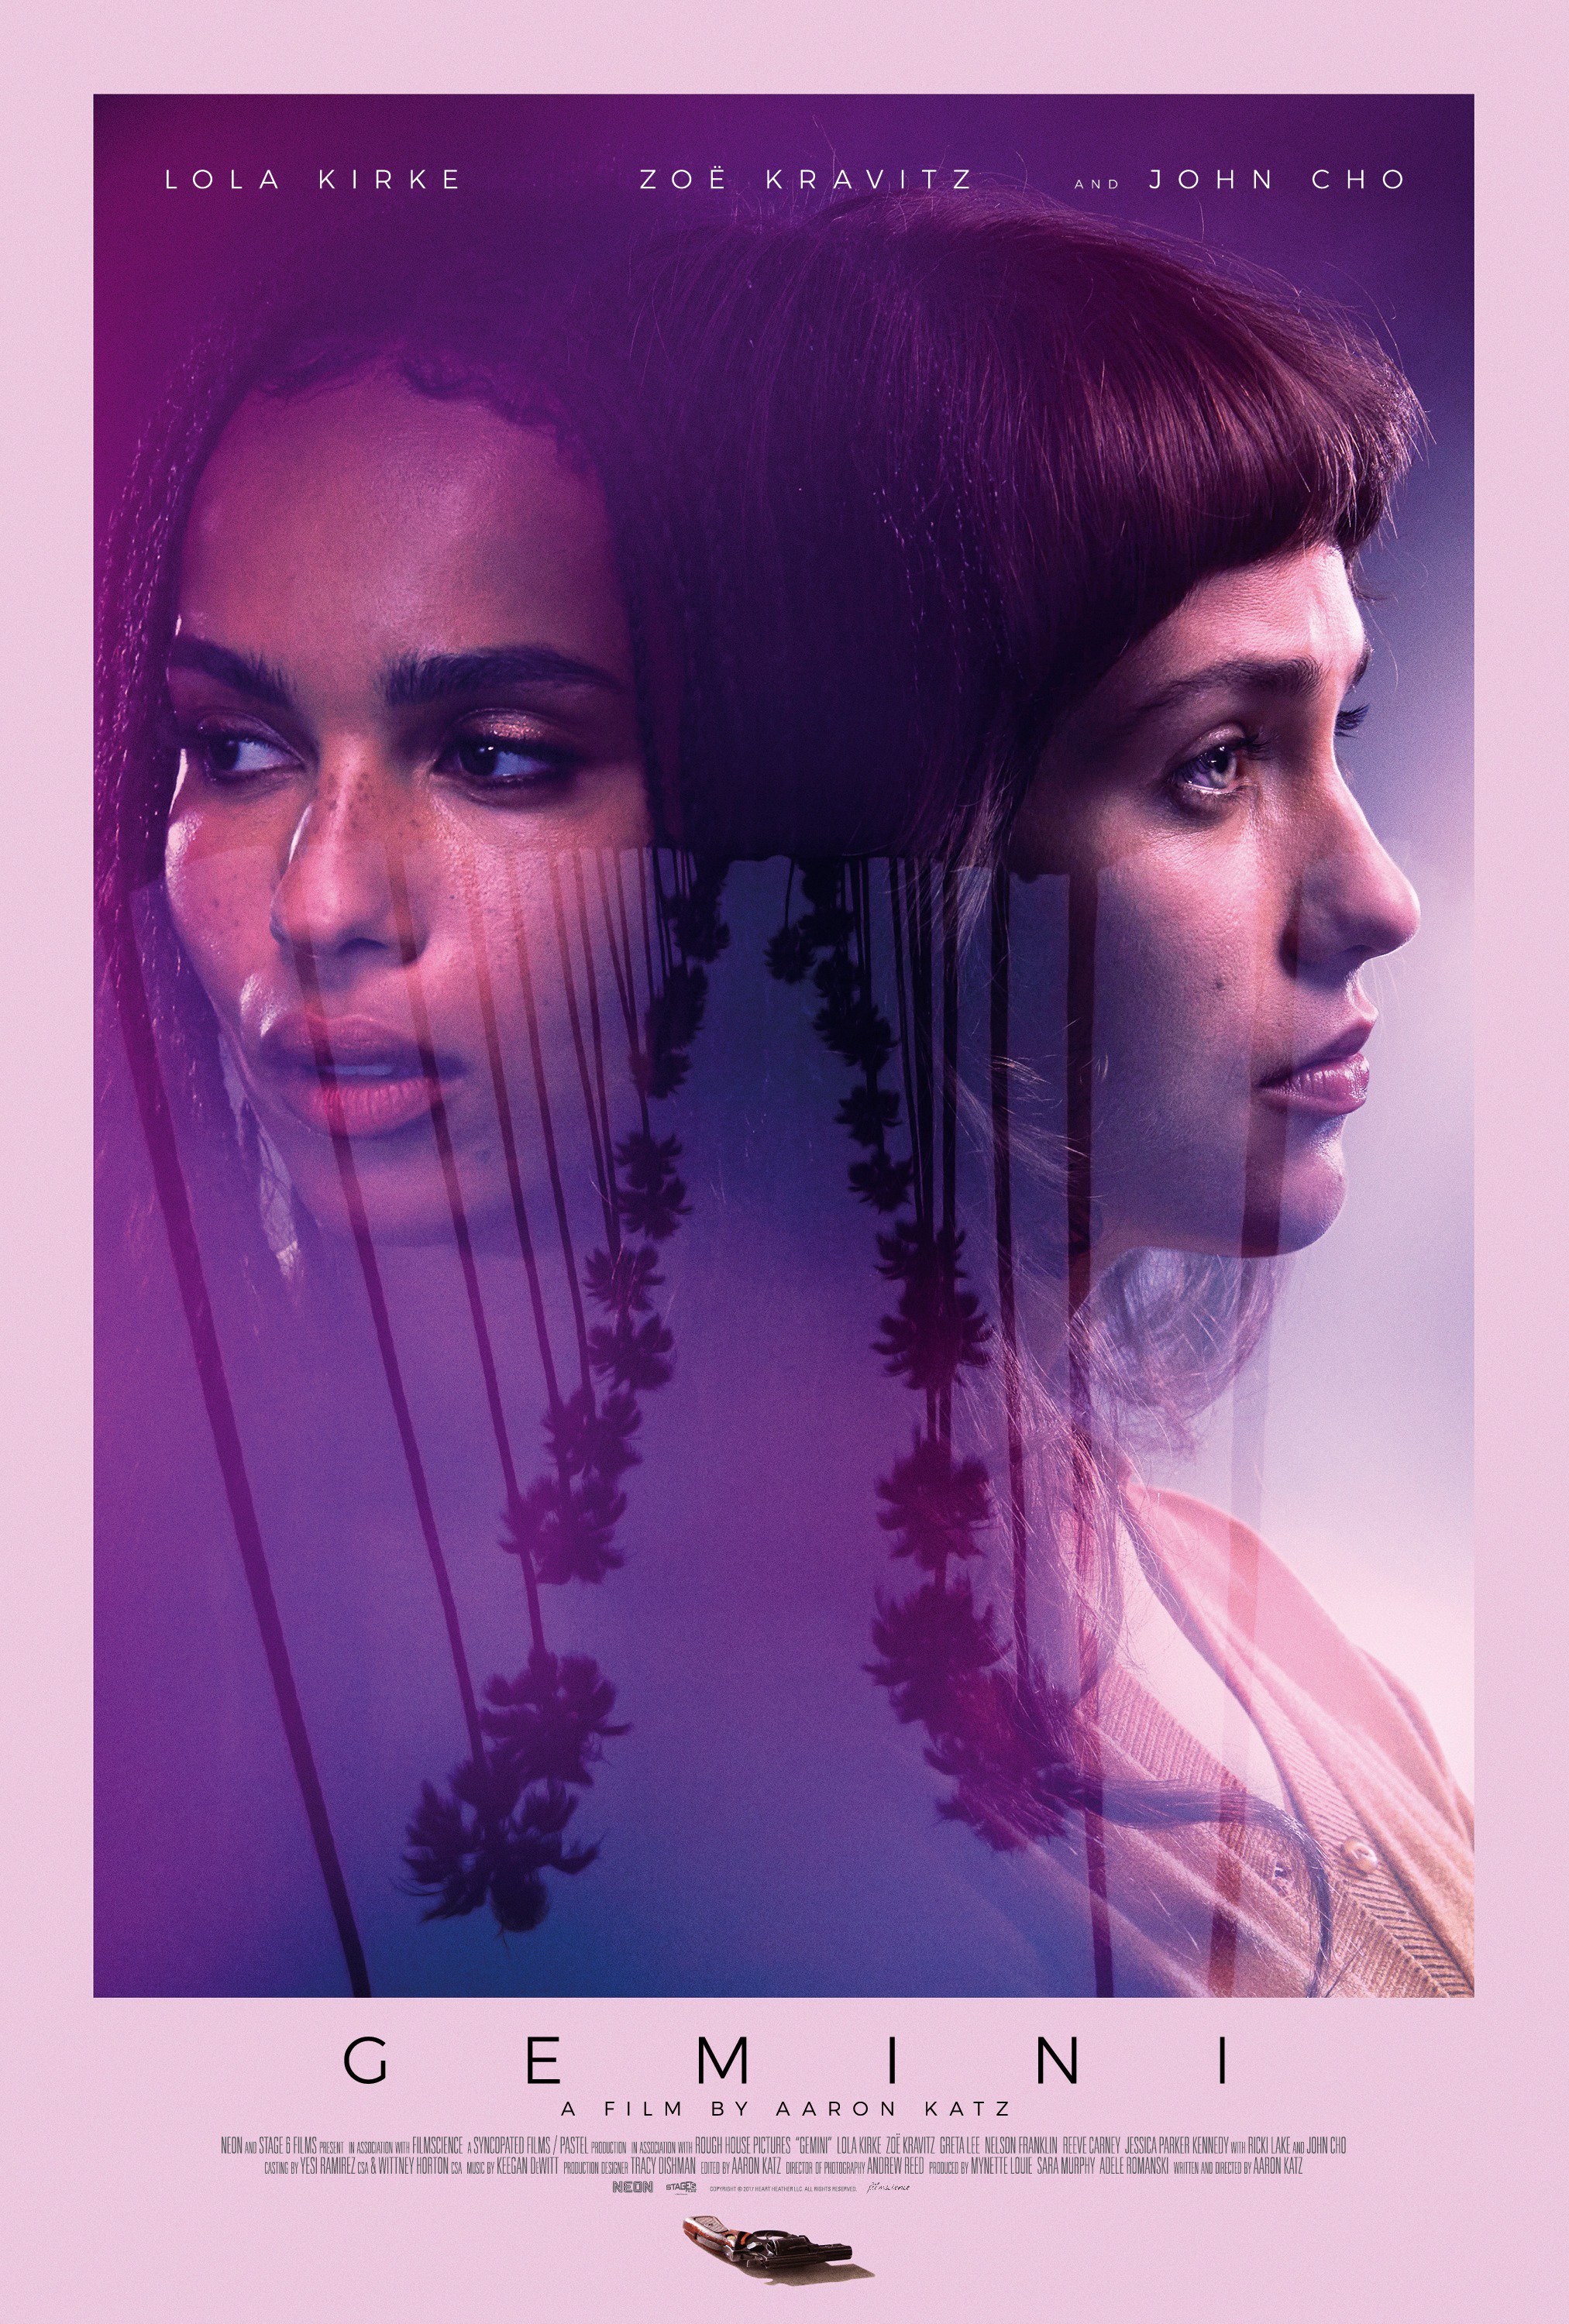 gemini cover art featuring two actresses